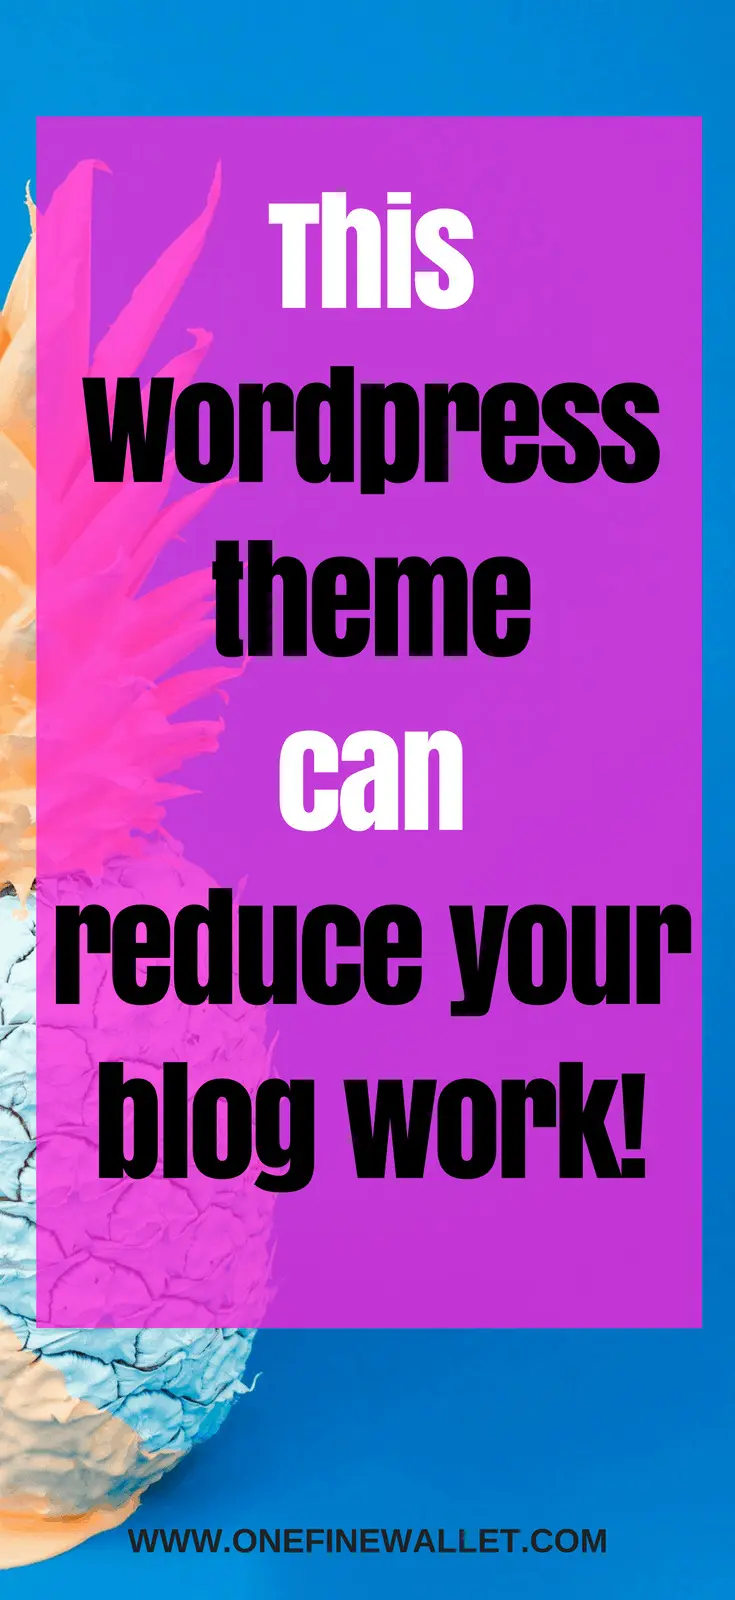 Learn how this wordpress theme saved my blog and cut my blog work in half! #blogging #bloggingideas #makemoneyblogging #wordpresstheme #makemoneyonline